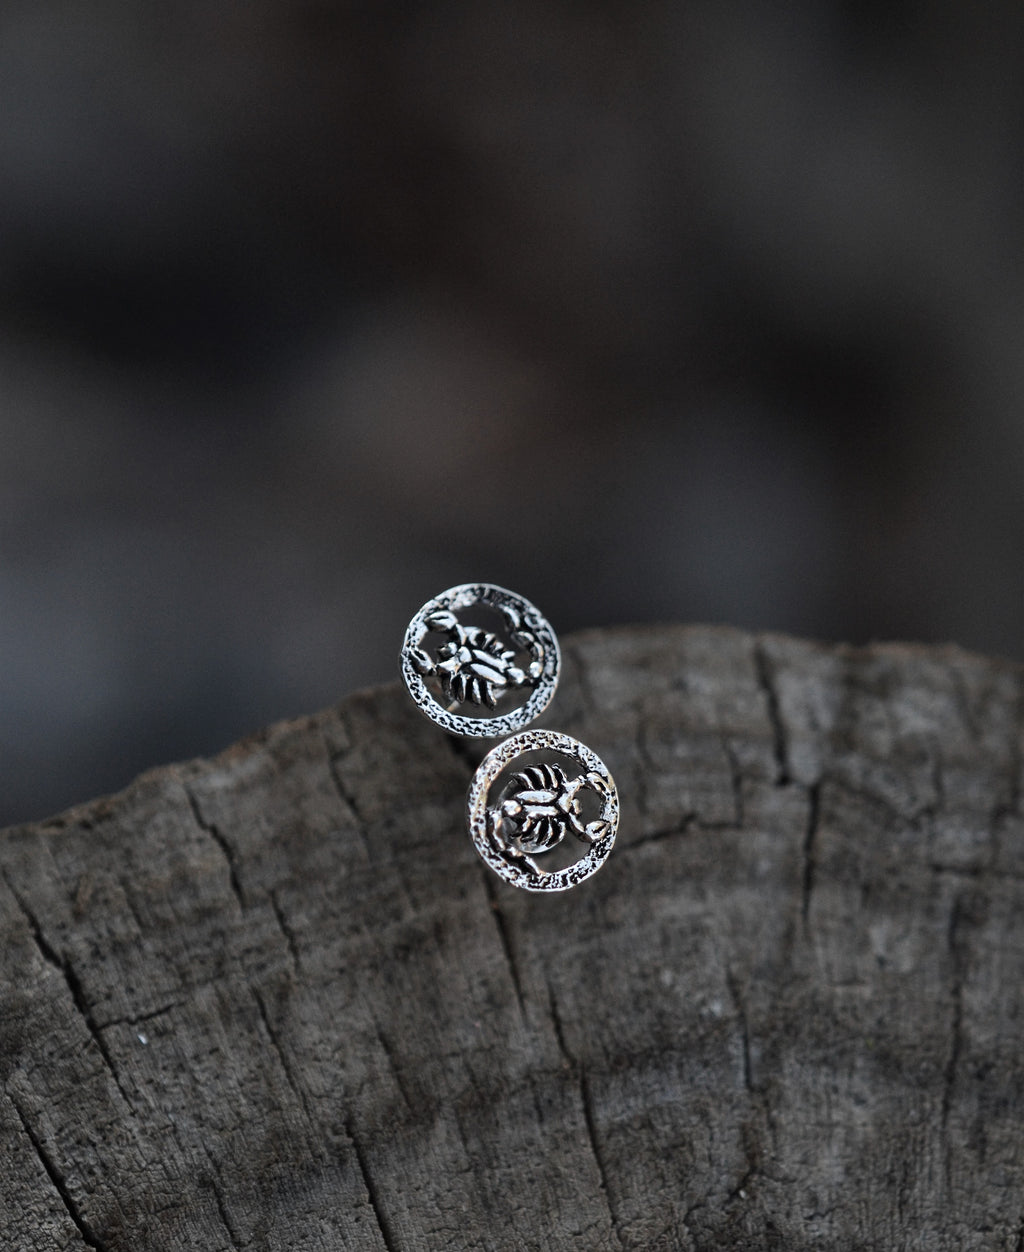 Only 1 Pair Left! Zodiac Round Scorpion Studs - Sterling Silver